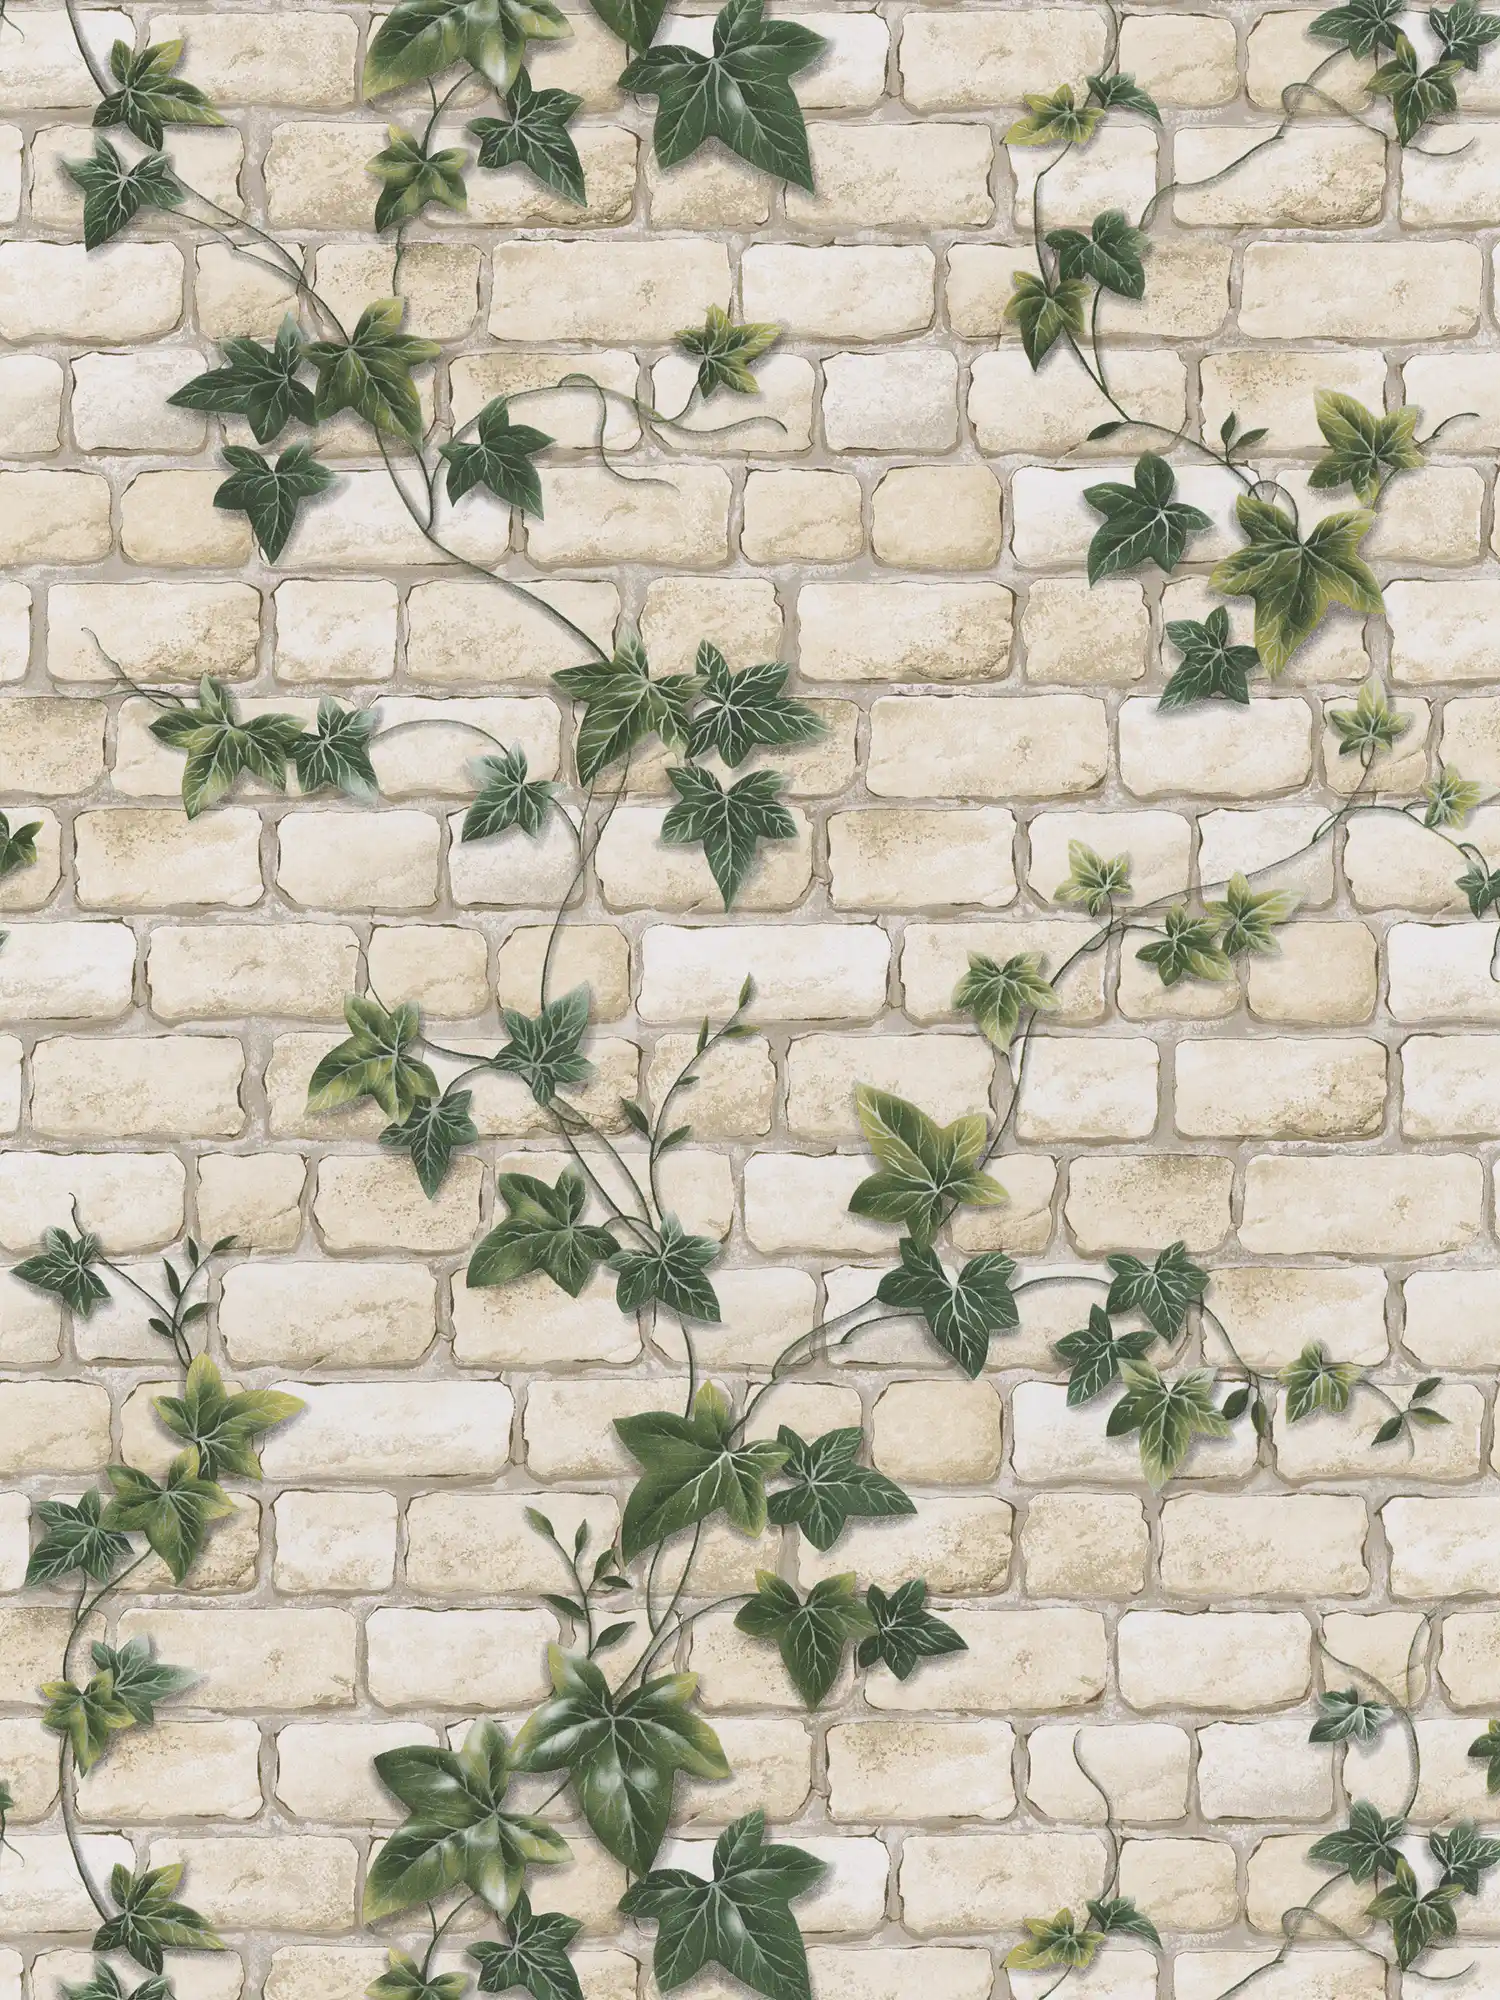 Wallpaper with masonry & ivy vines, stone look - white, green
